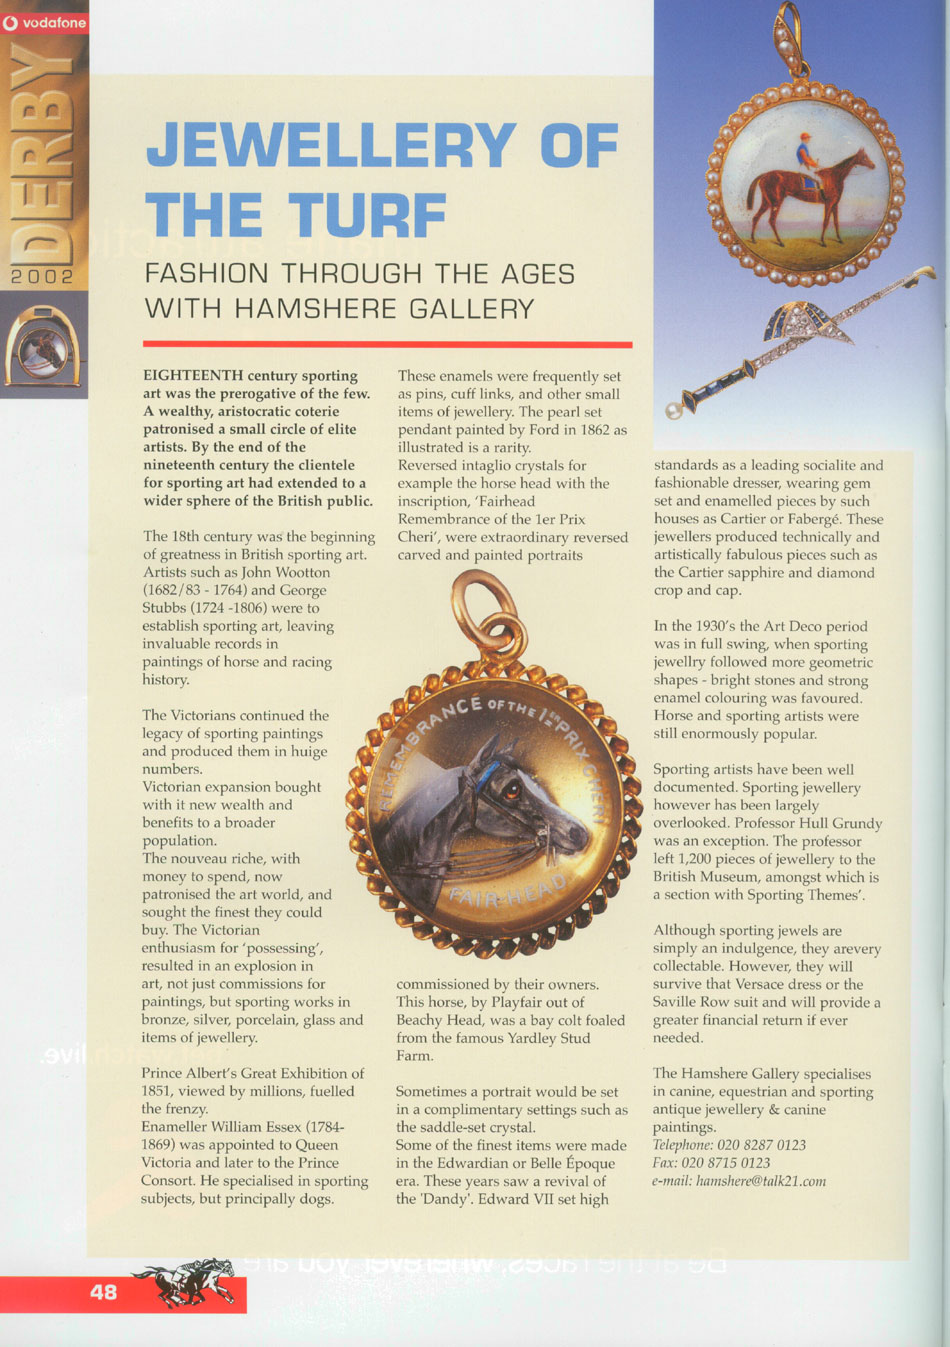 Click to see full size: Derby 2002 - Jewellery of the Turf Feature